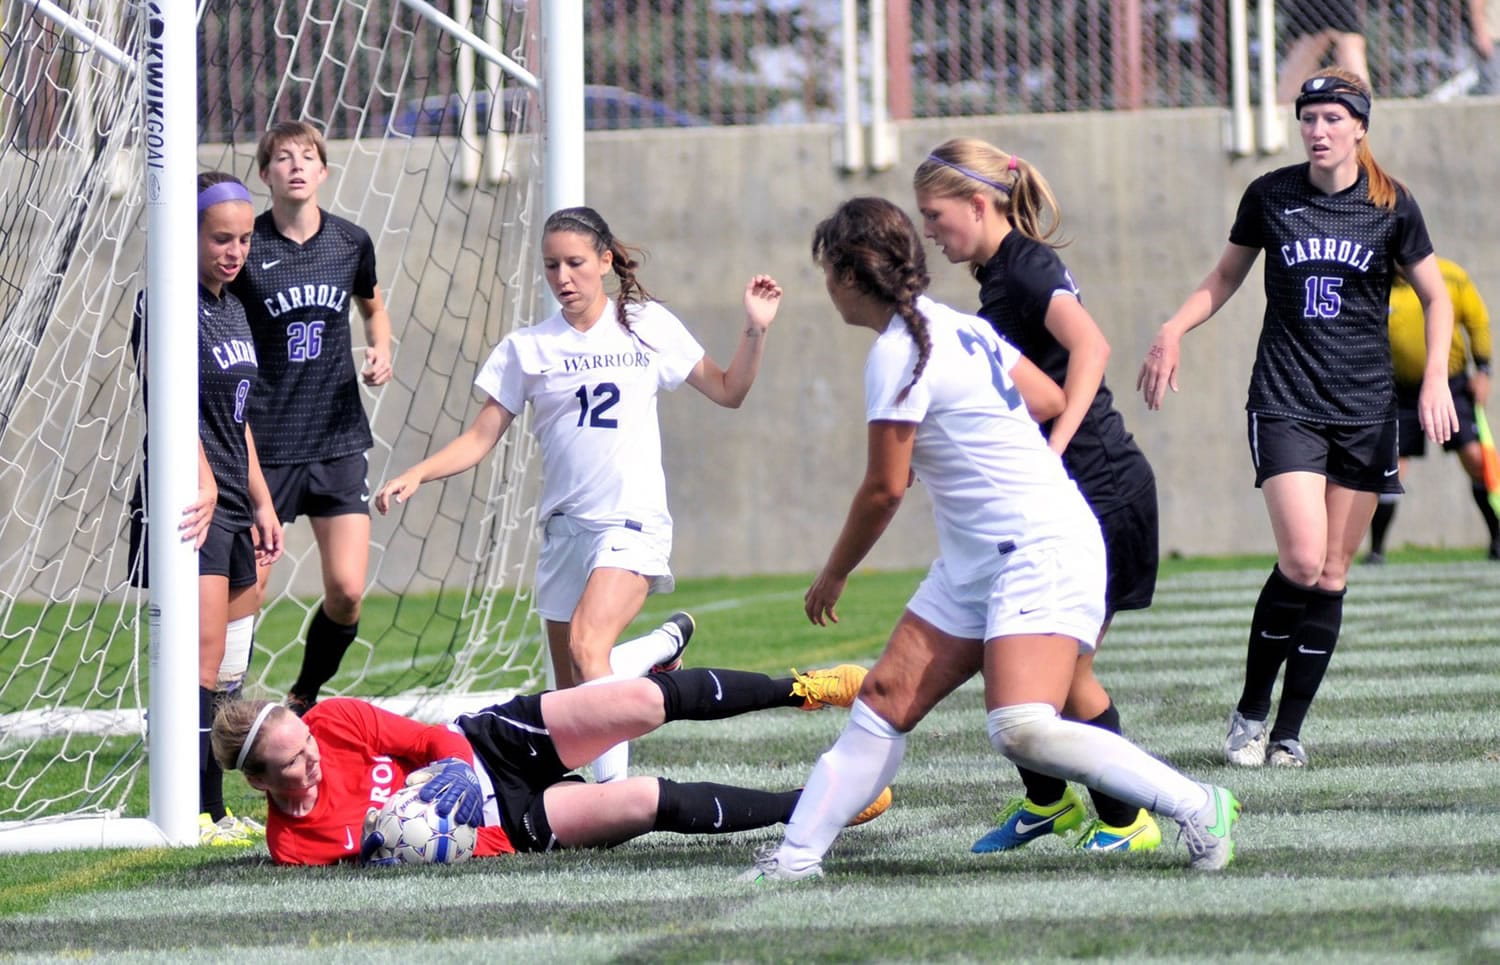 Carroll College goalkeeper Jamie Carter makes another stop.